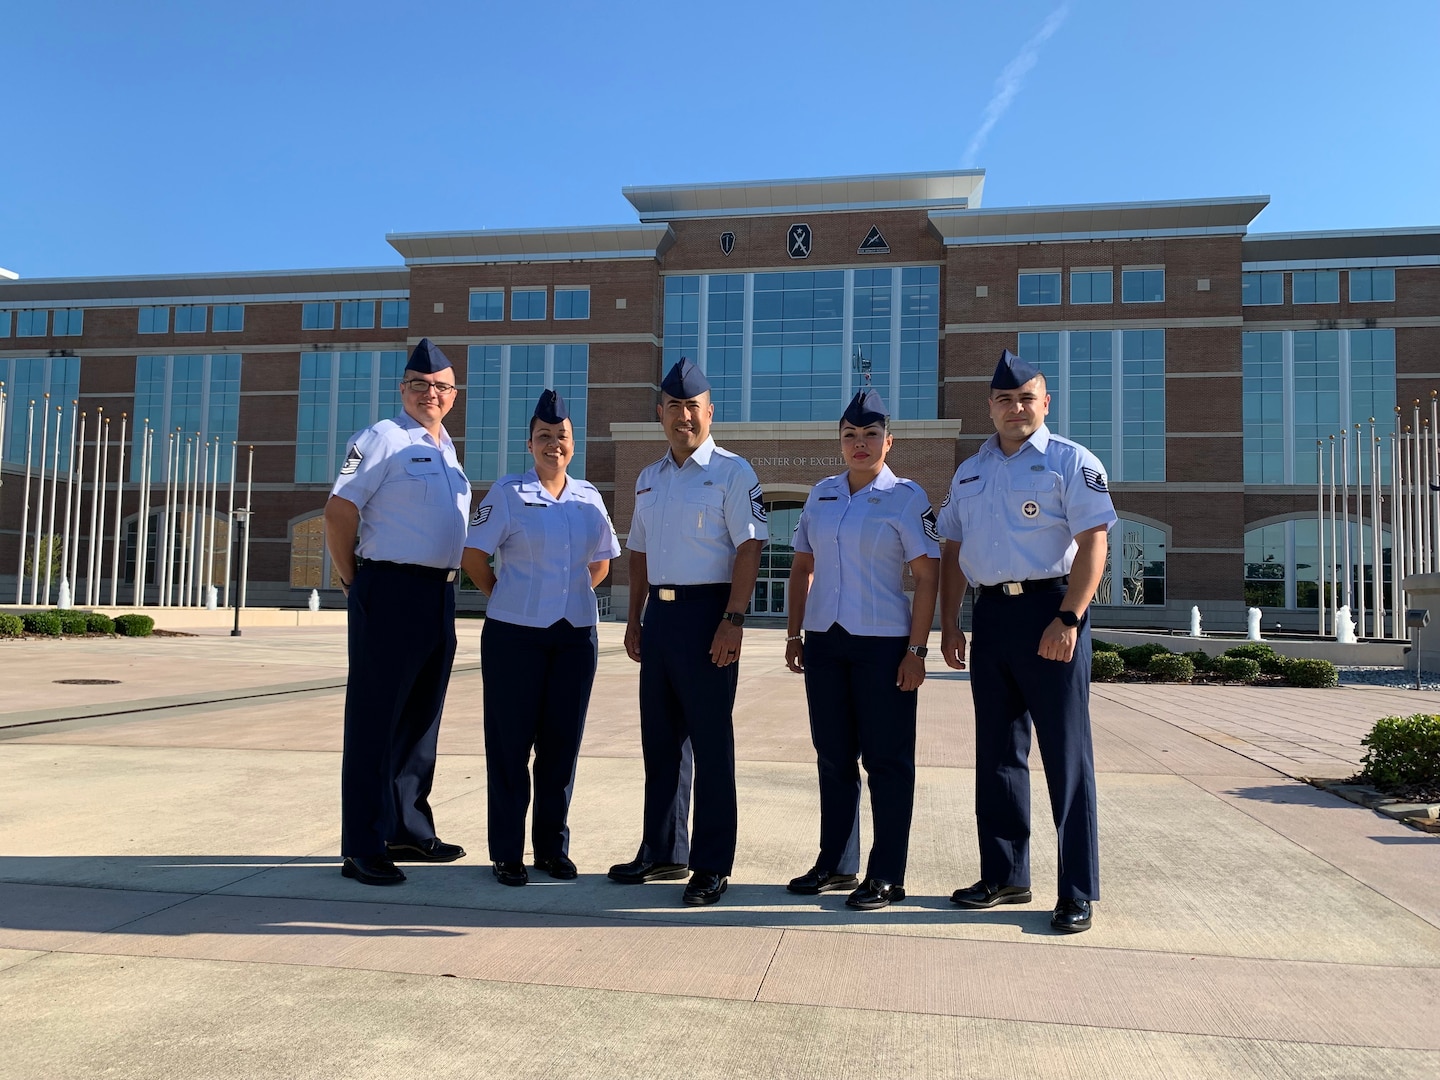 Five NCOs from IAAFA pose for group photo.